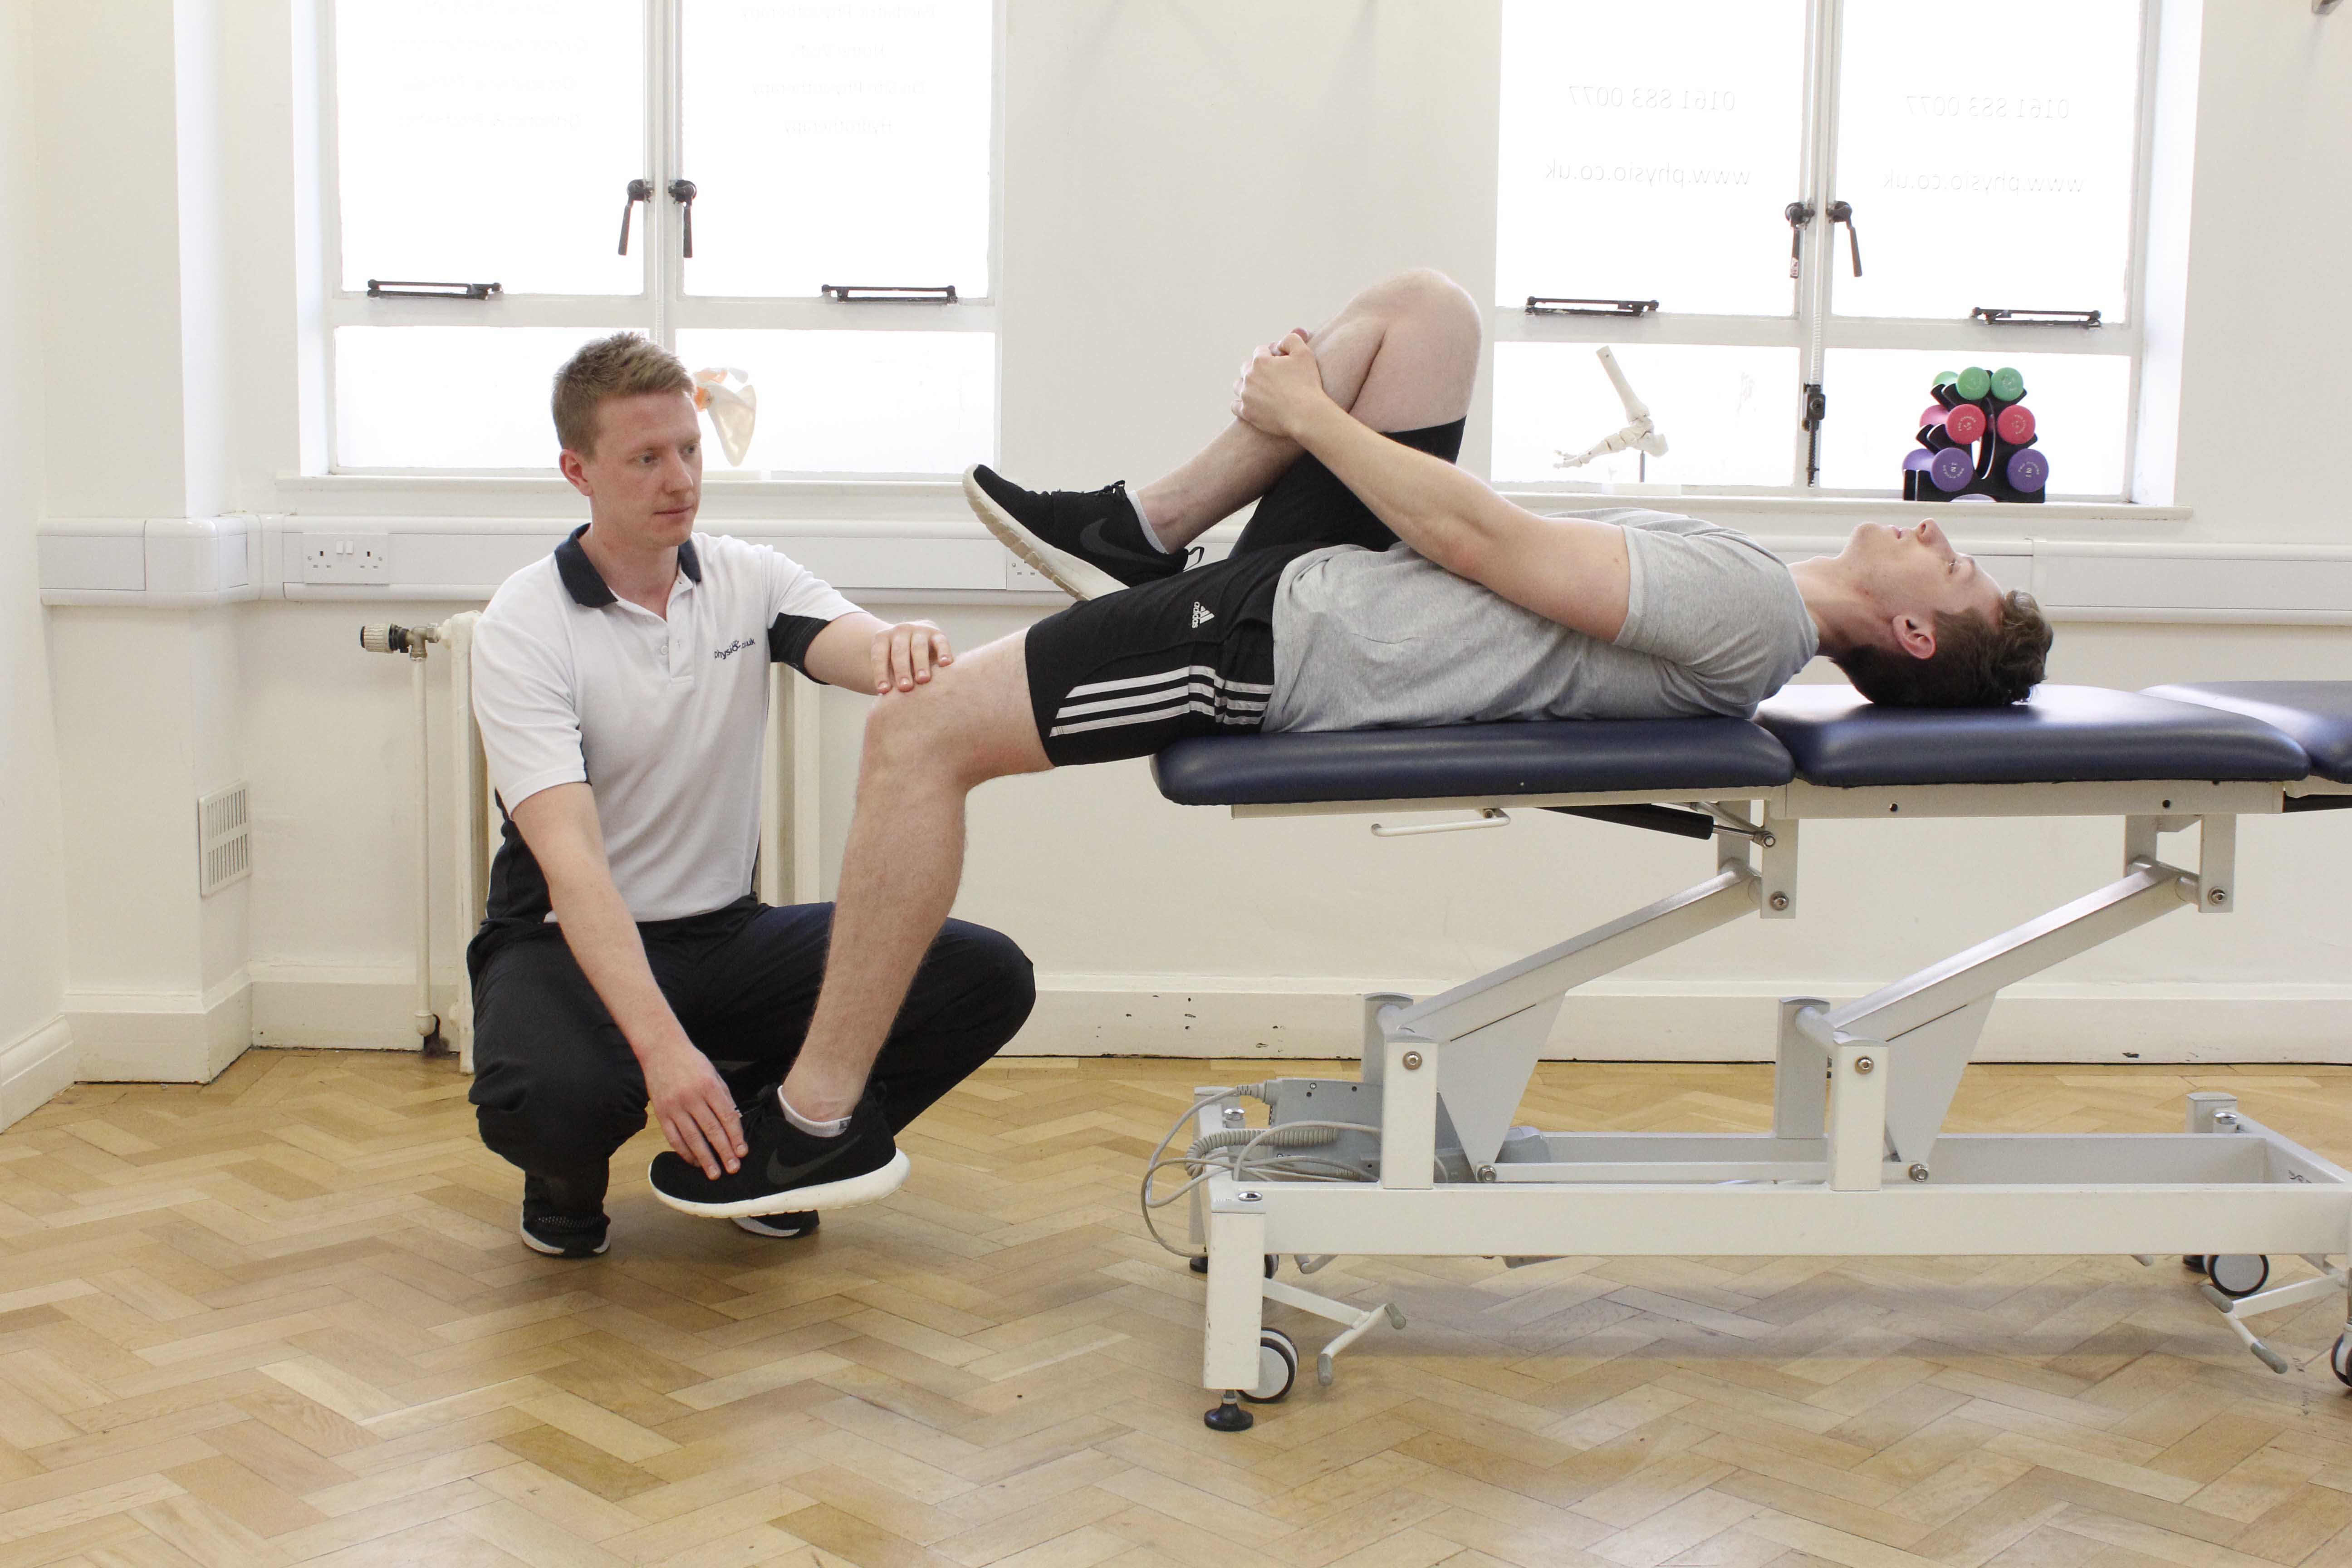 Biomechanical assessment led by specialist physiotherapist